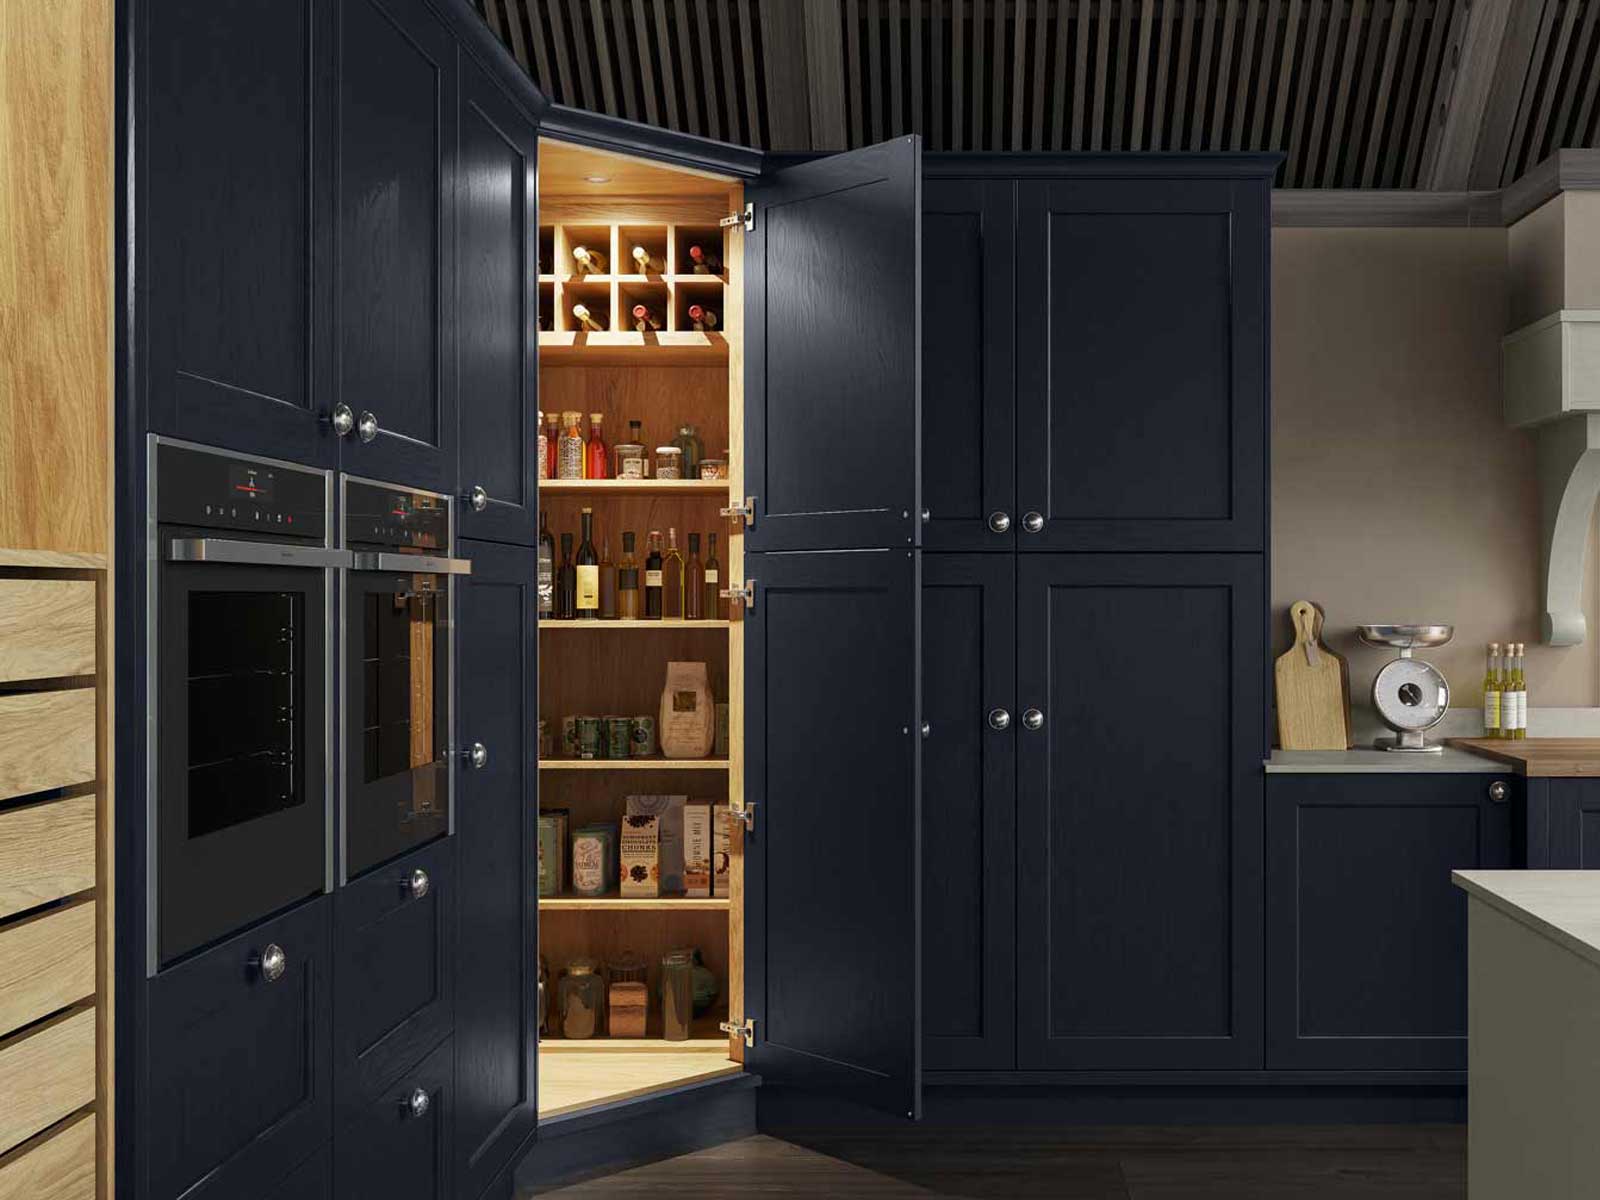 A pantry housed in Shaker kitchen cabinets in a modern colourful kitchen